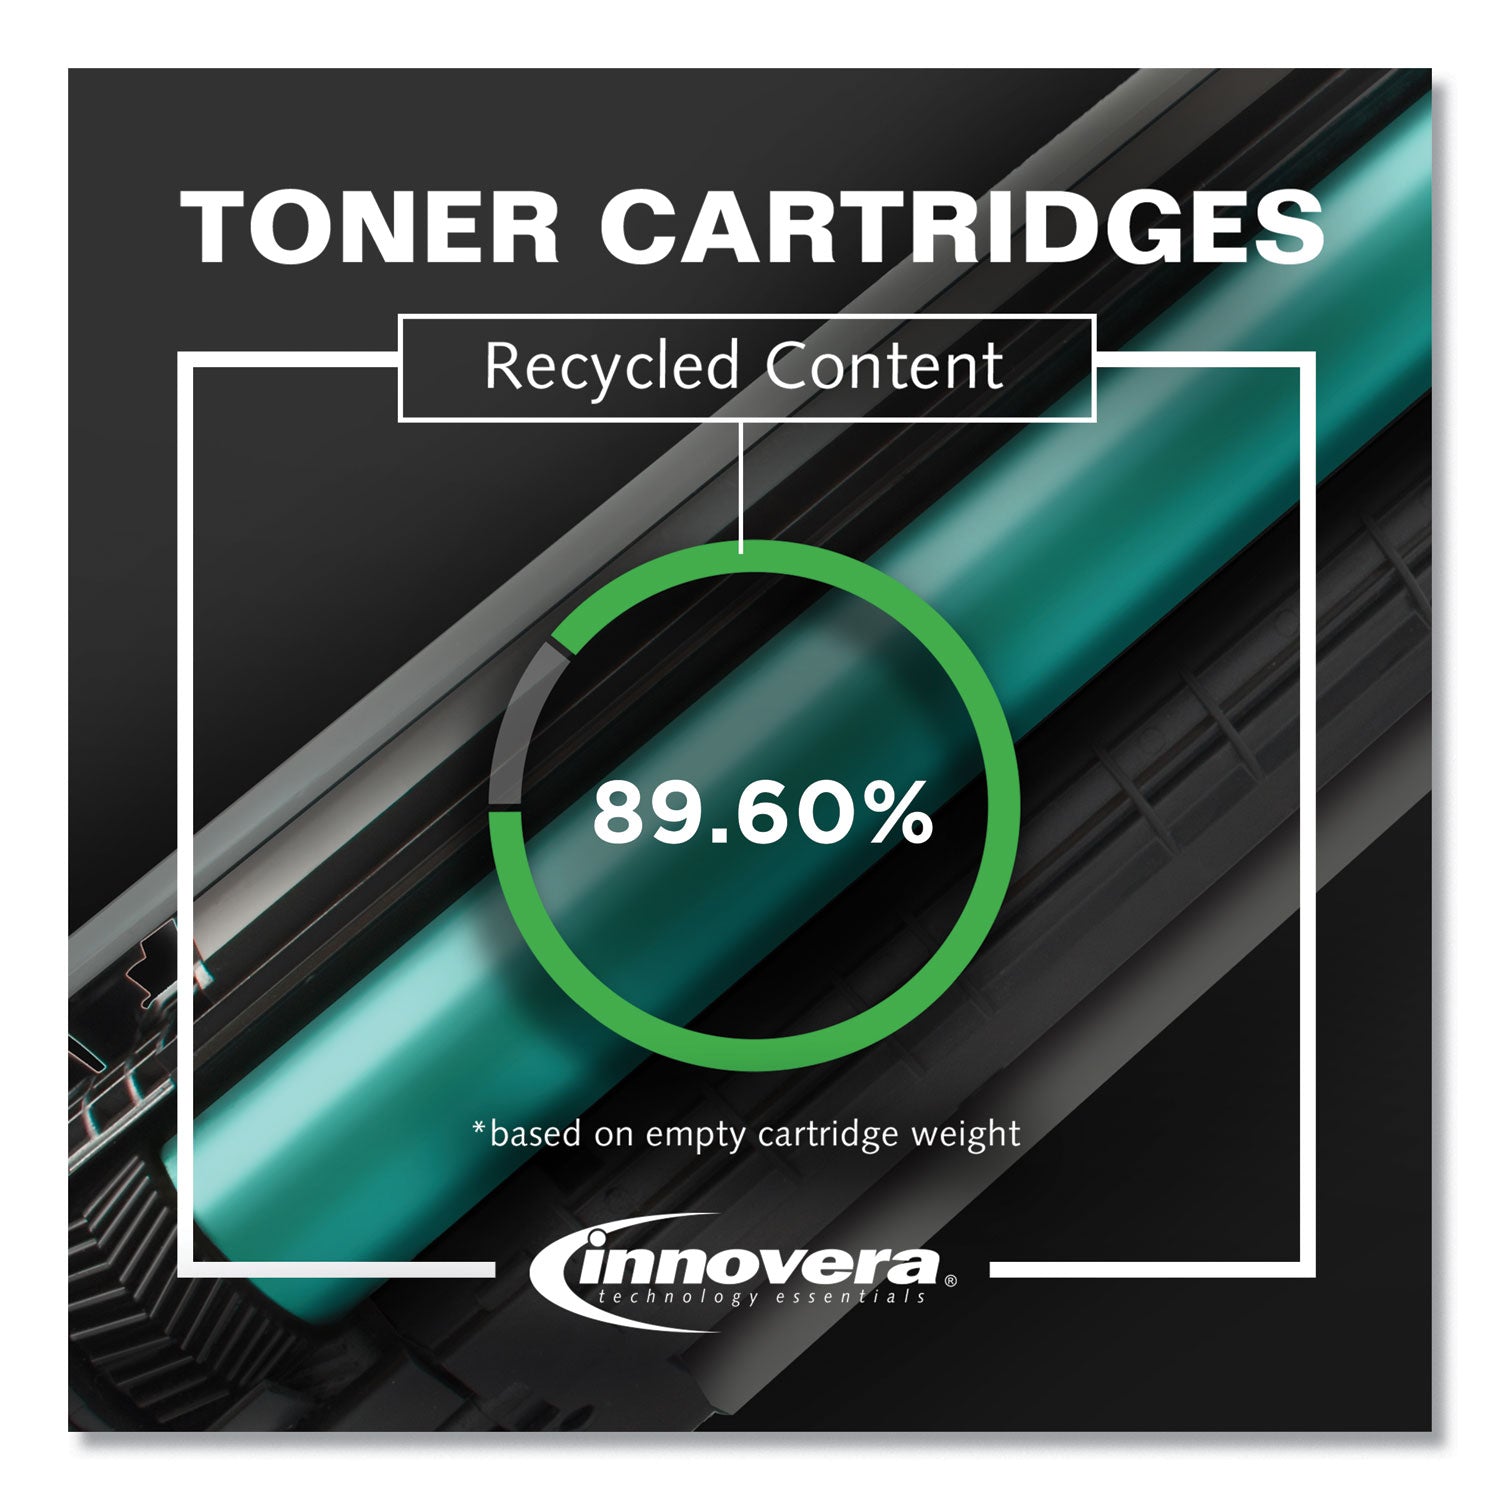 Remanufactured Black Toner, Replacement for 51A (Q7551A), 6,500 Page-Yield, Ships in 1-3 Business Days - 